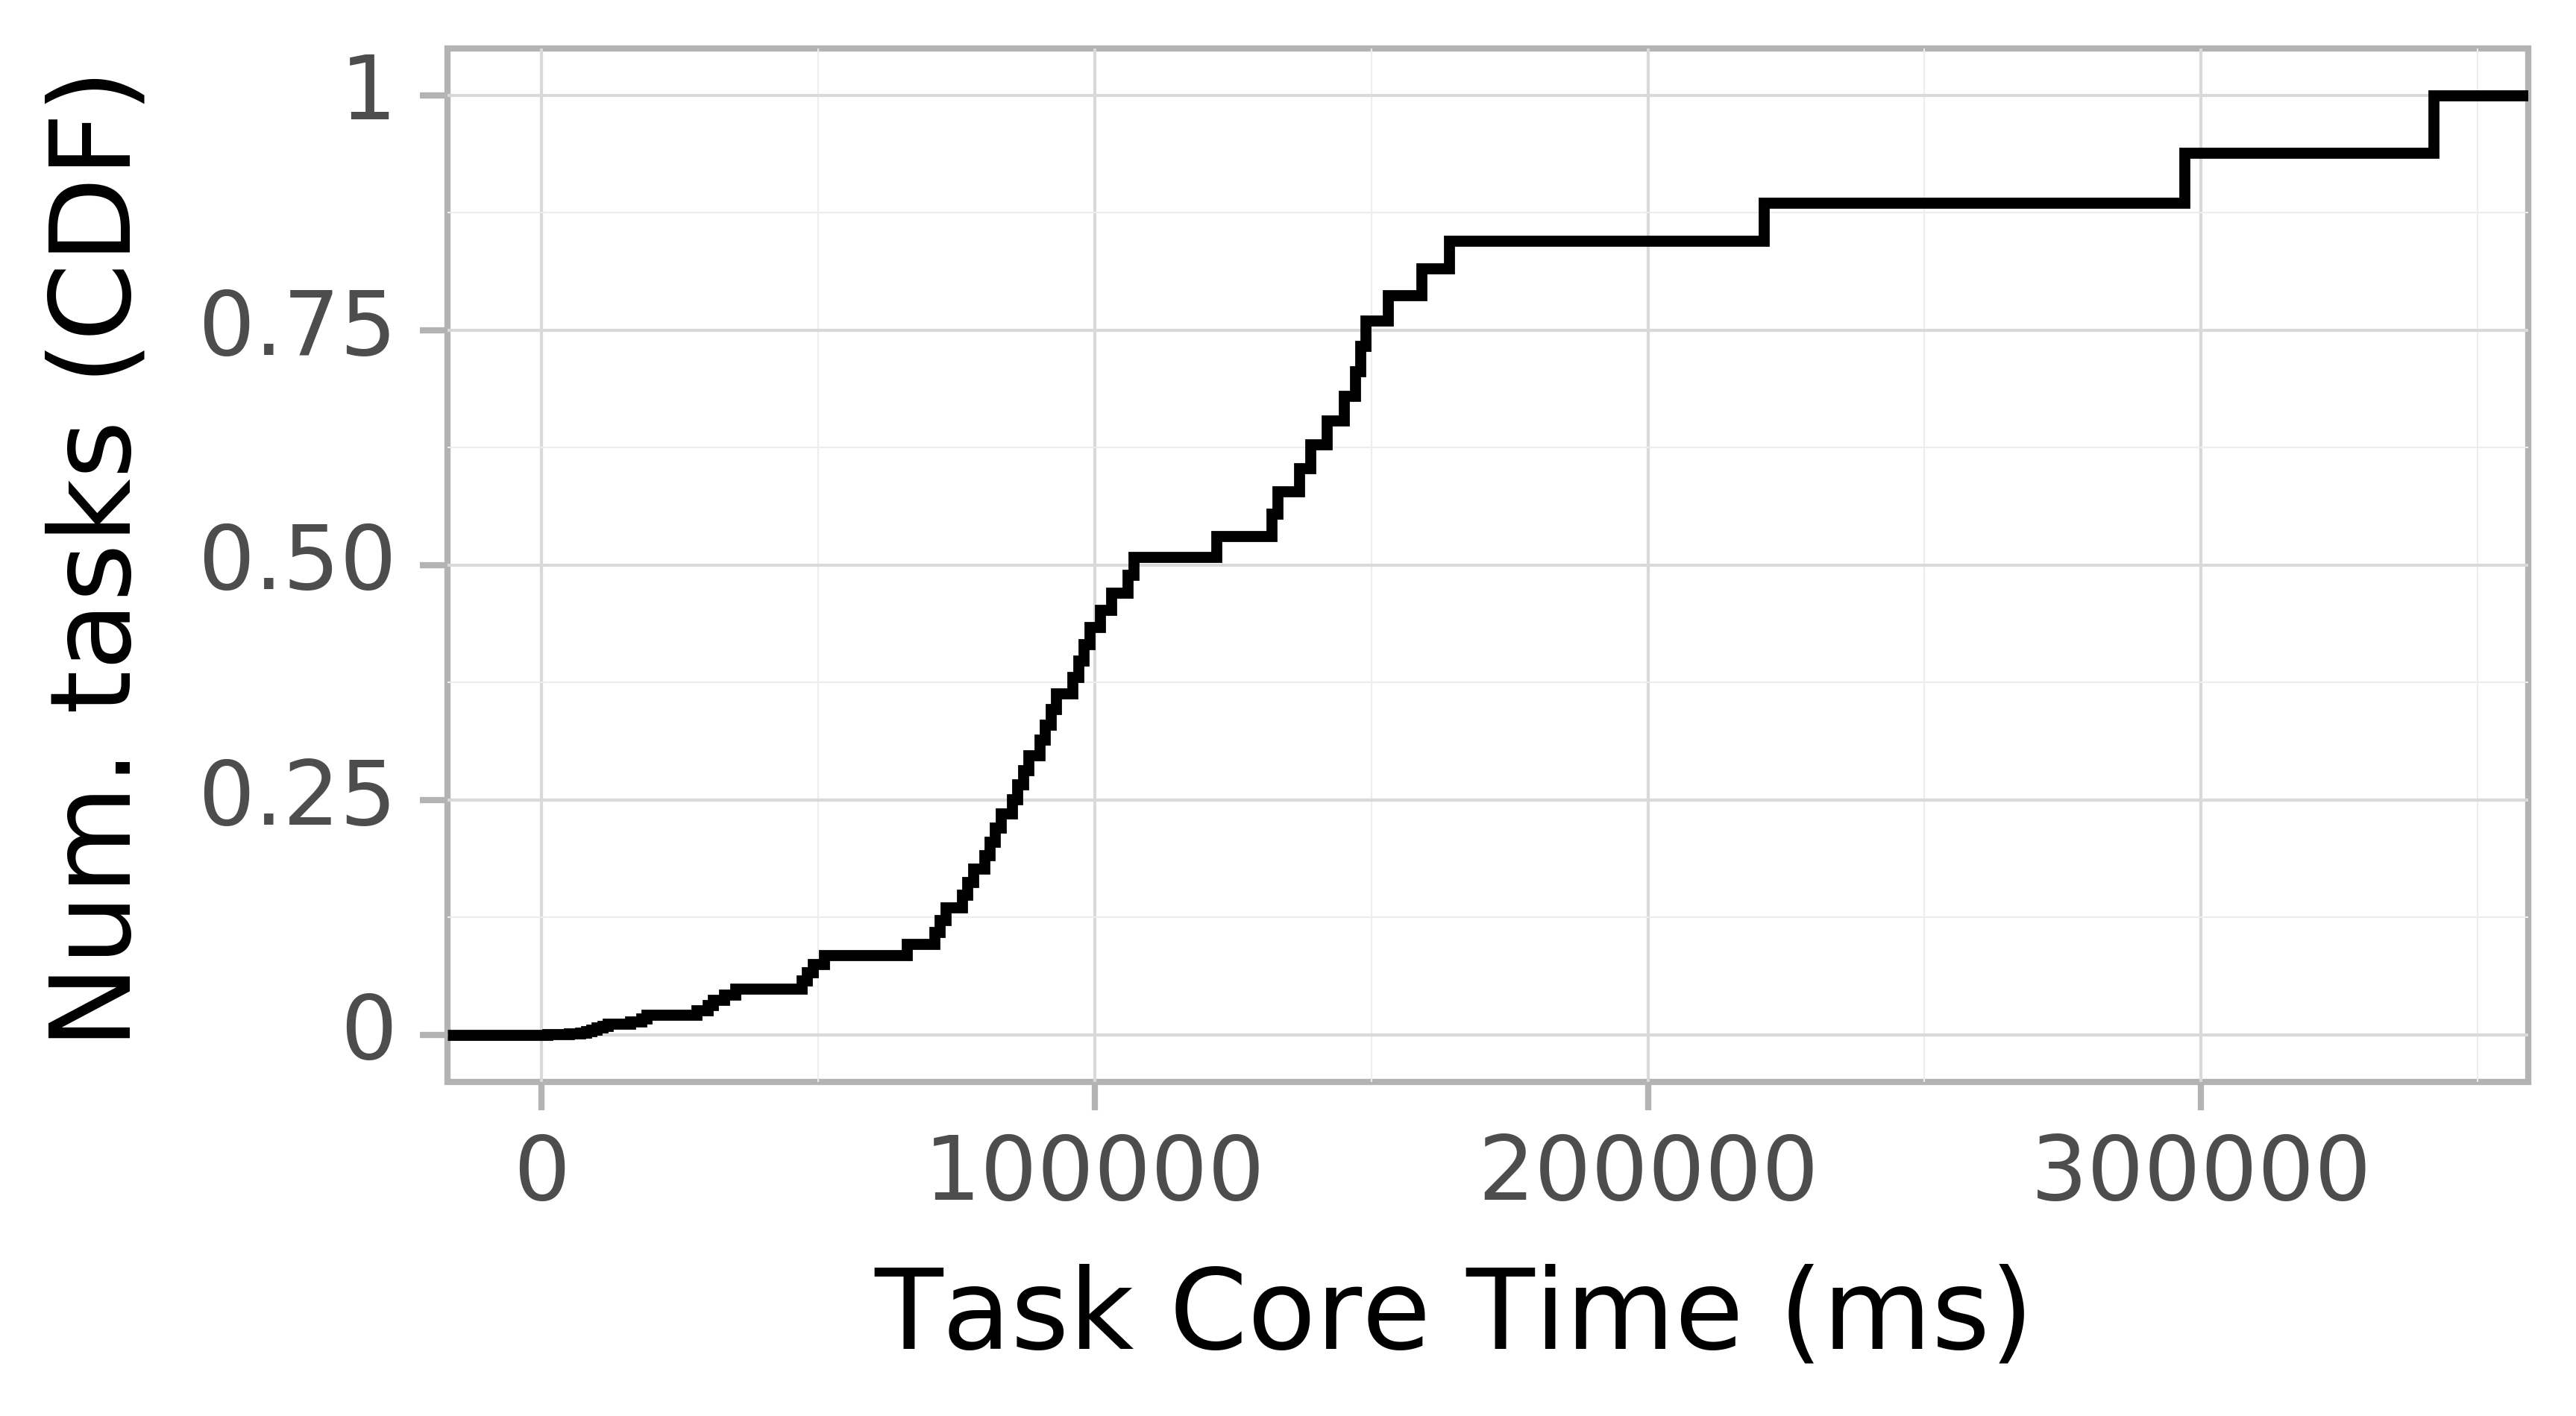 task resource time CDF graph for the Pegasus_P6b trace.